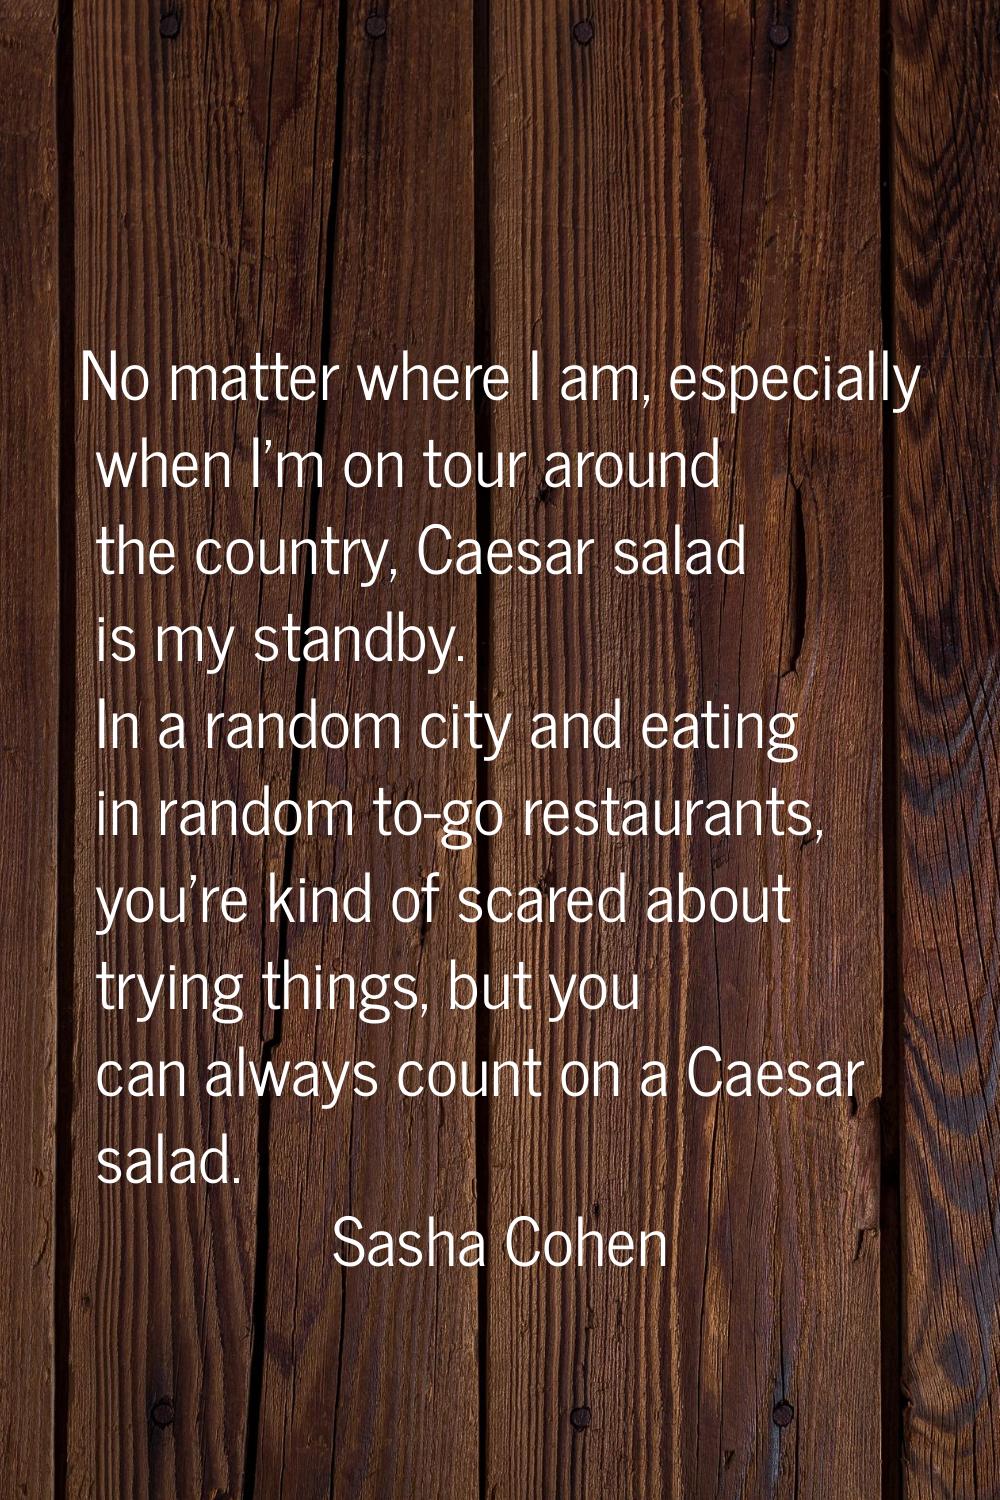 No matter where I am, especially when I'm on tour around the country, Caesar salad is my standby. I